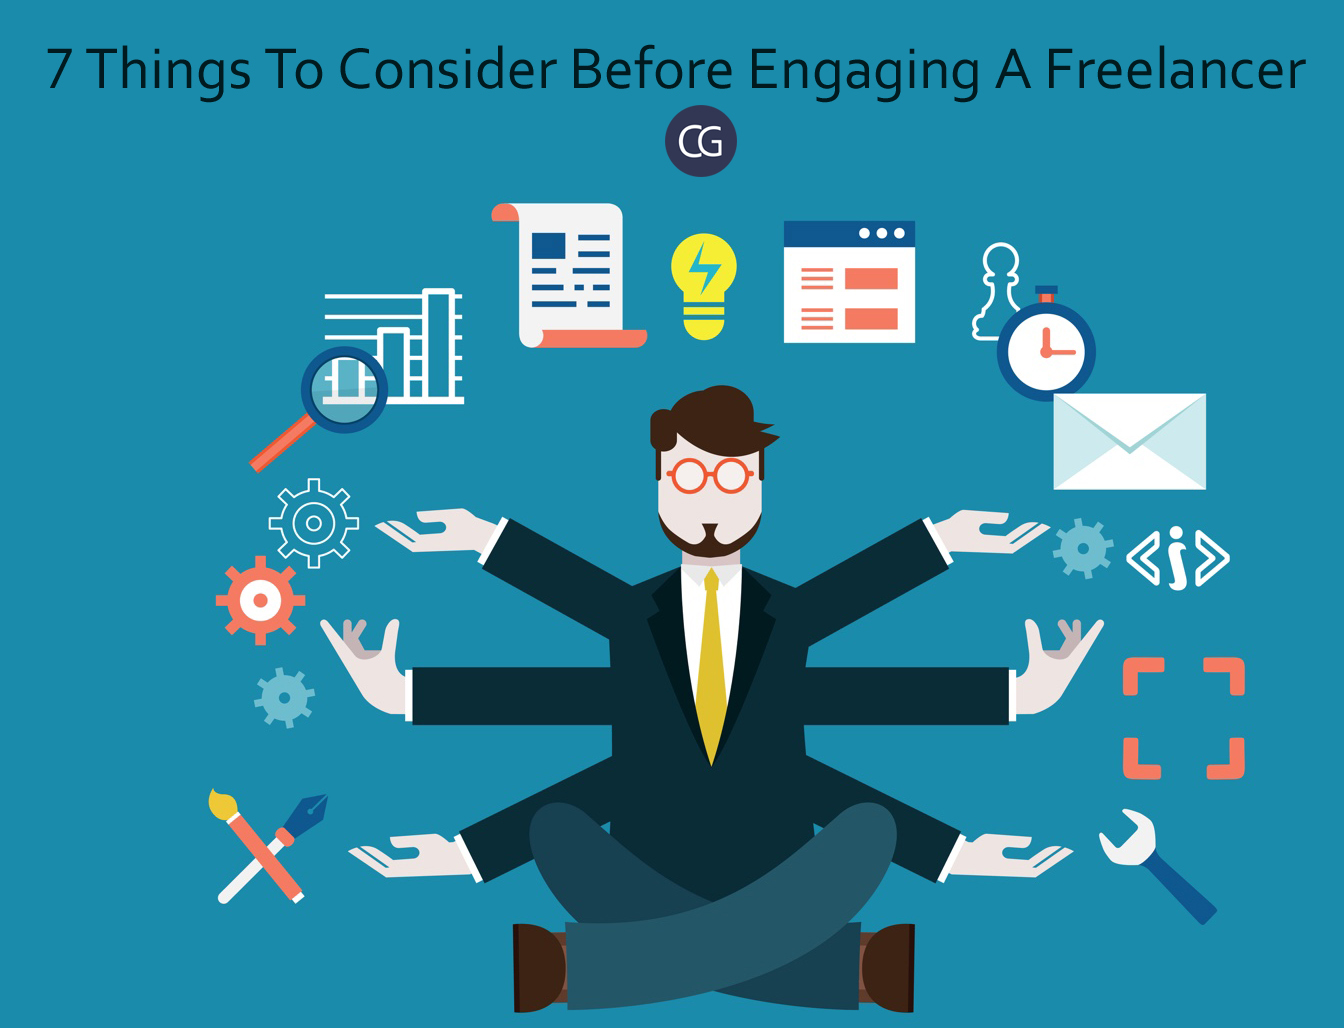 7-Things-To-Consider-Before-Engaging-A-Freelancer